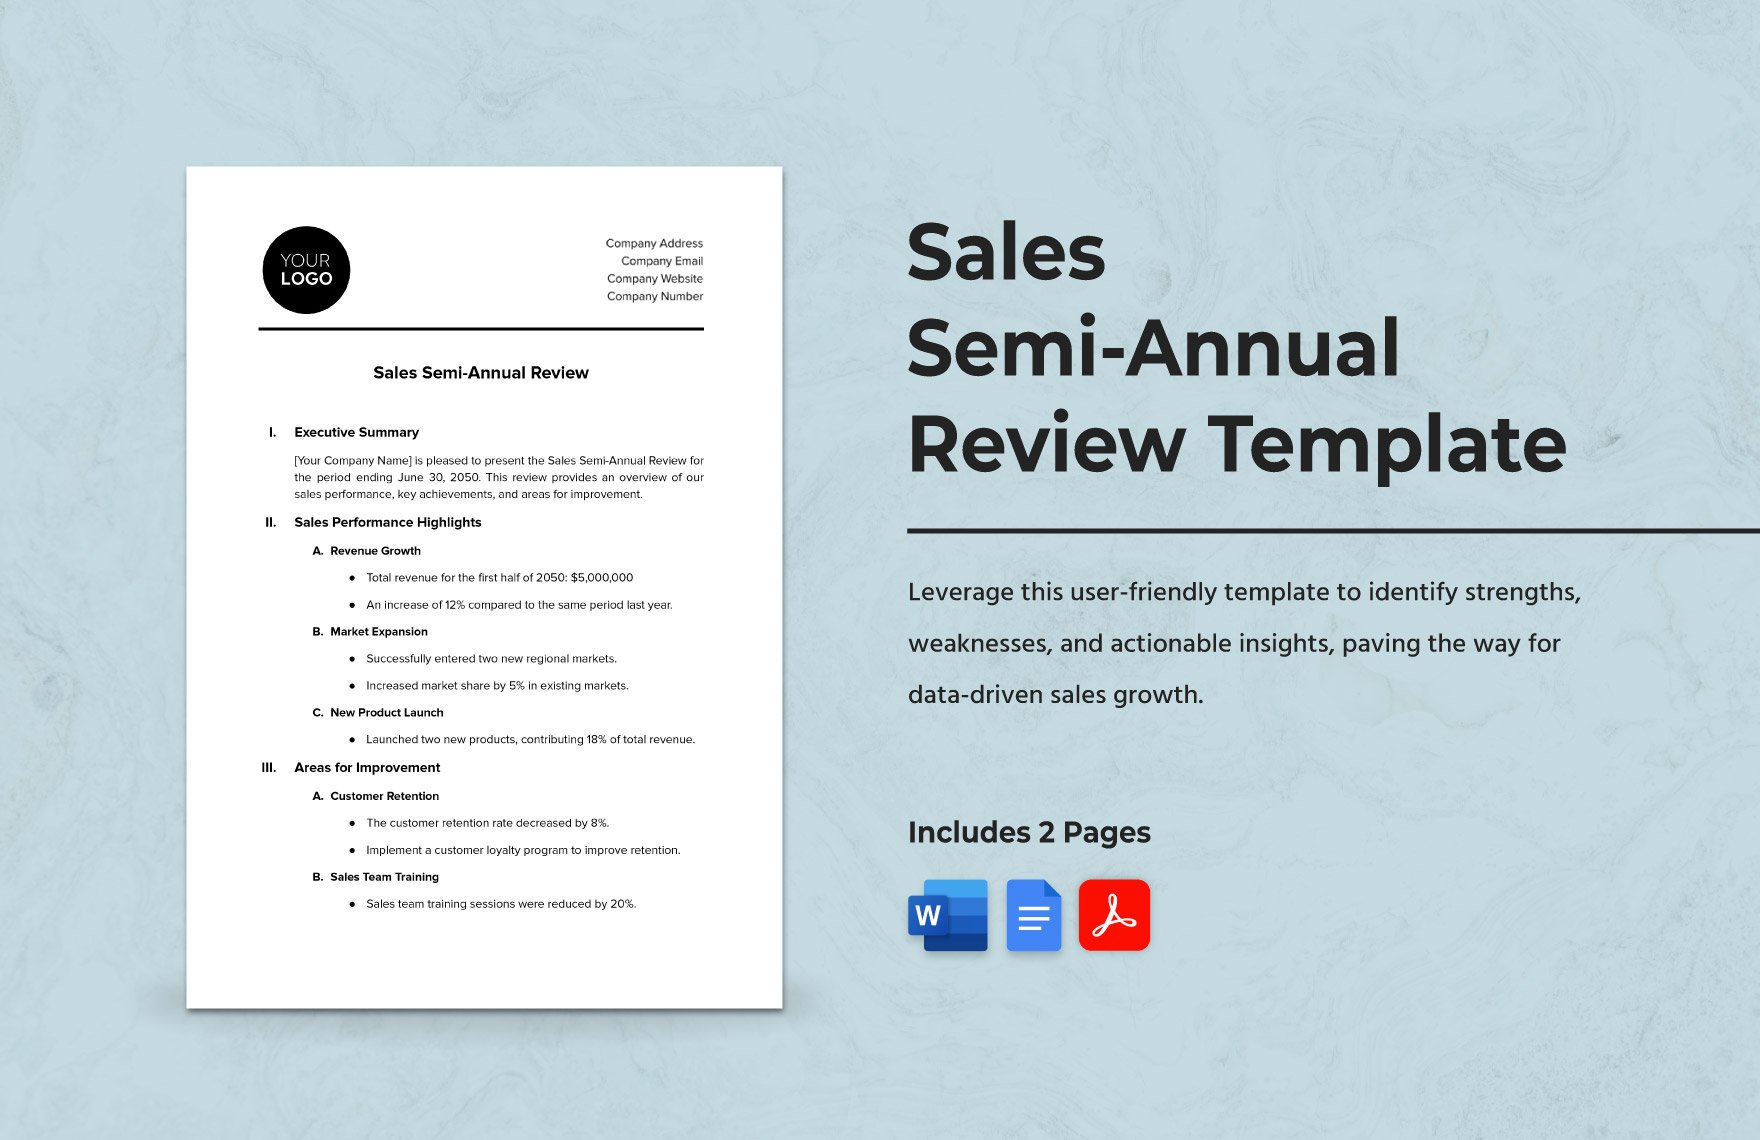 Sales Semi-Annual Review Template in Word, PDF, Google Docs - Download